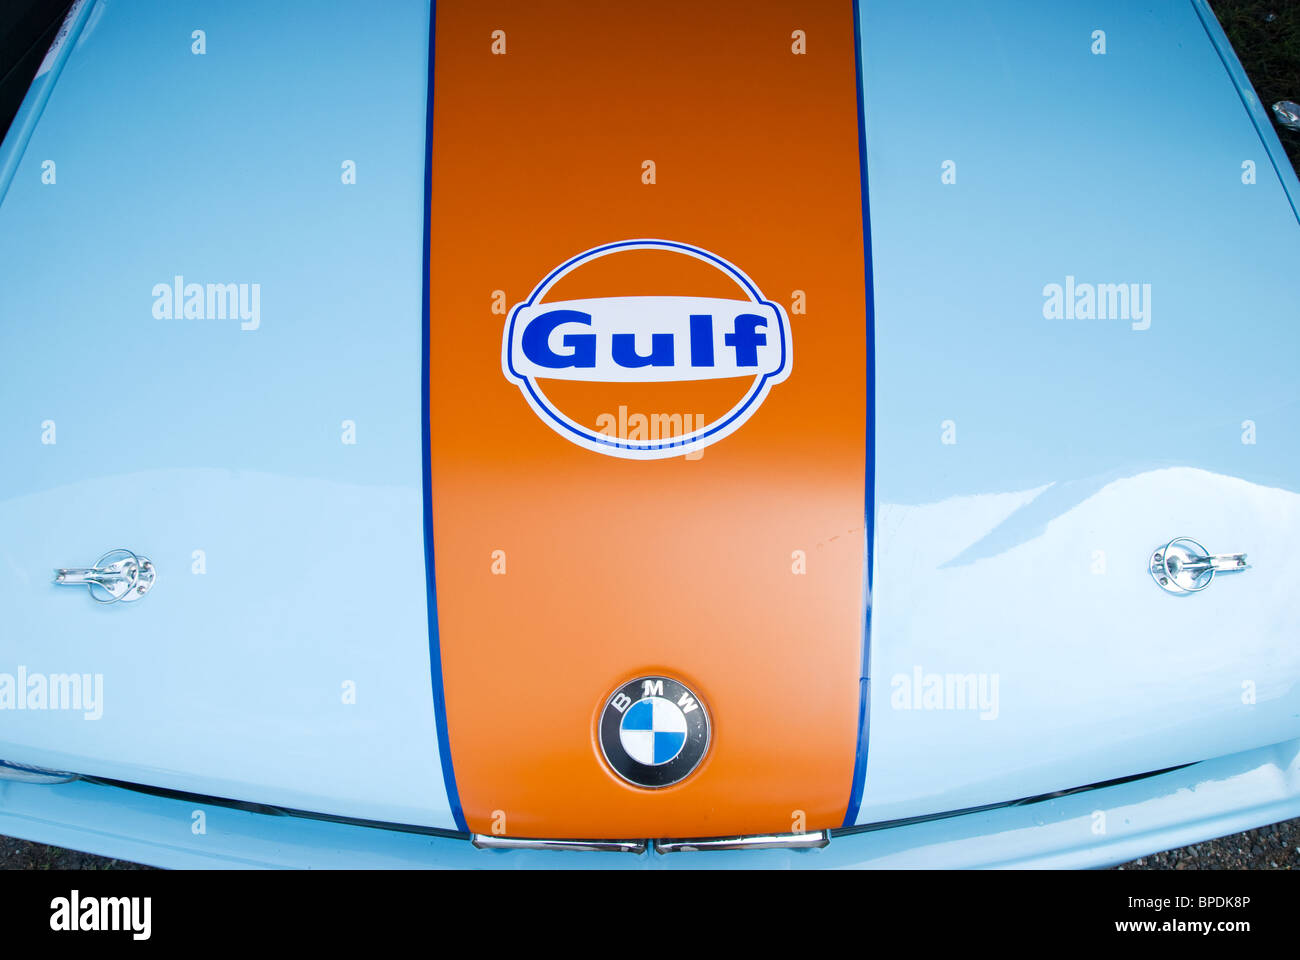 Bonnet of classic BMW 3-series in traditional Gulf Oil racing livery. Stock Photo